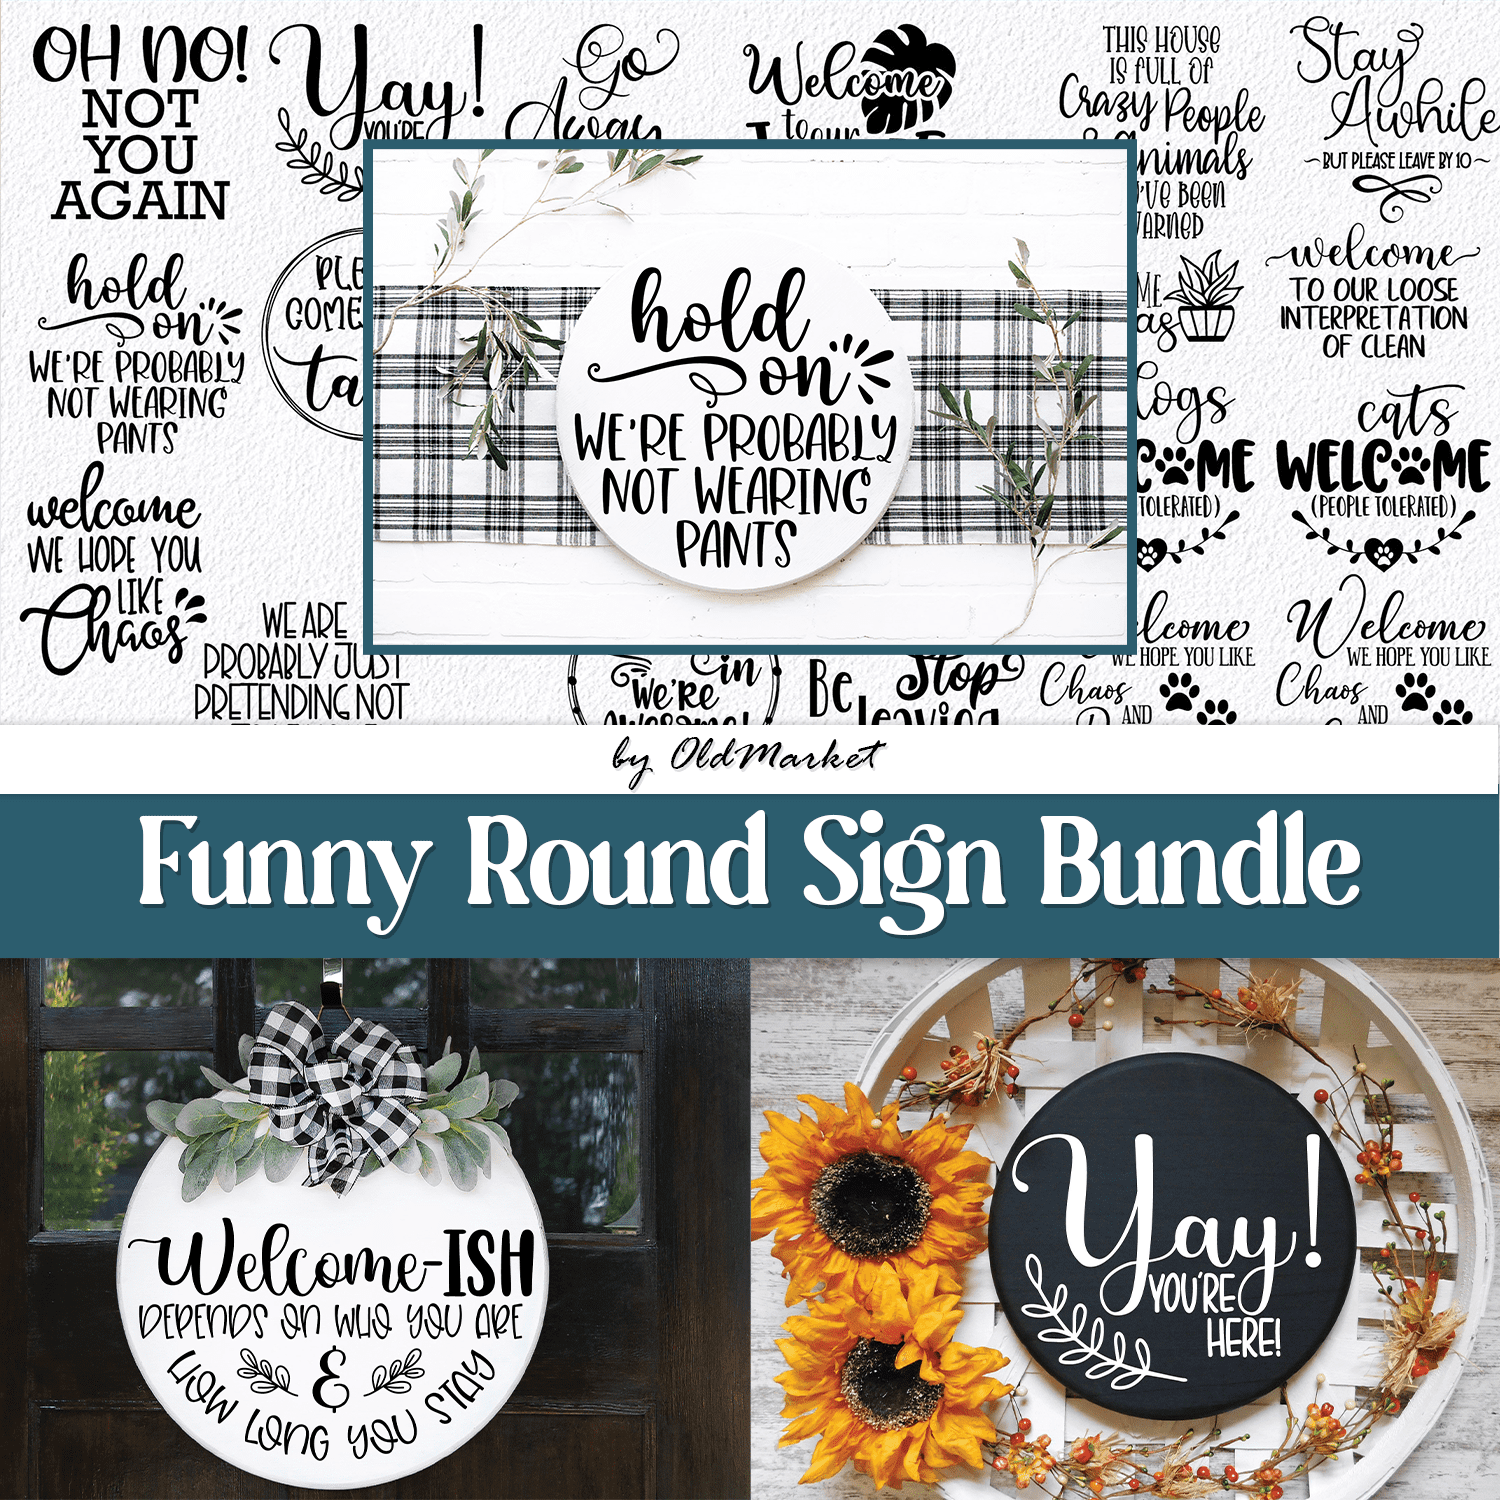 Funny Round Sign Bundle - main image preview.